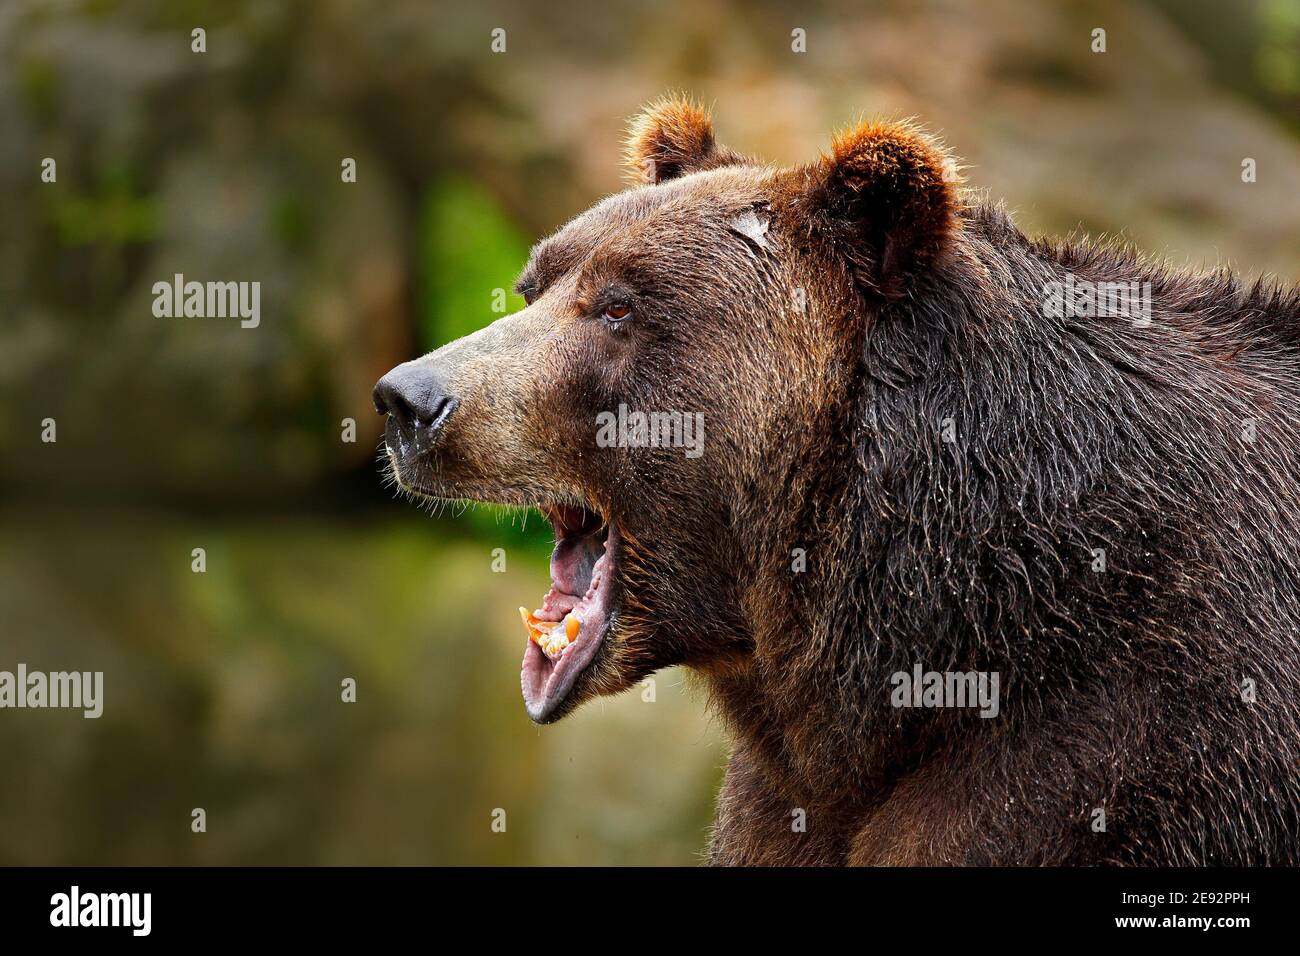 Bear with open muzzle. Portrait of brown bear. Detail face portrait of dangerous animal. Big animal in nature forest. Stock Photo